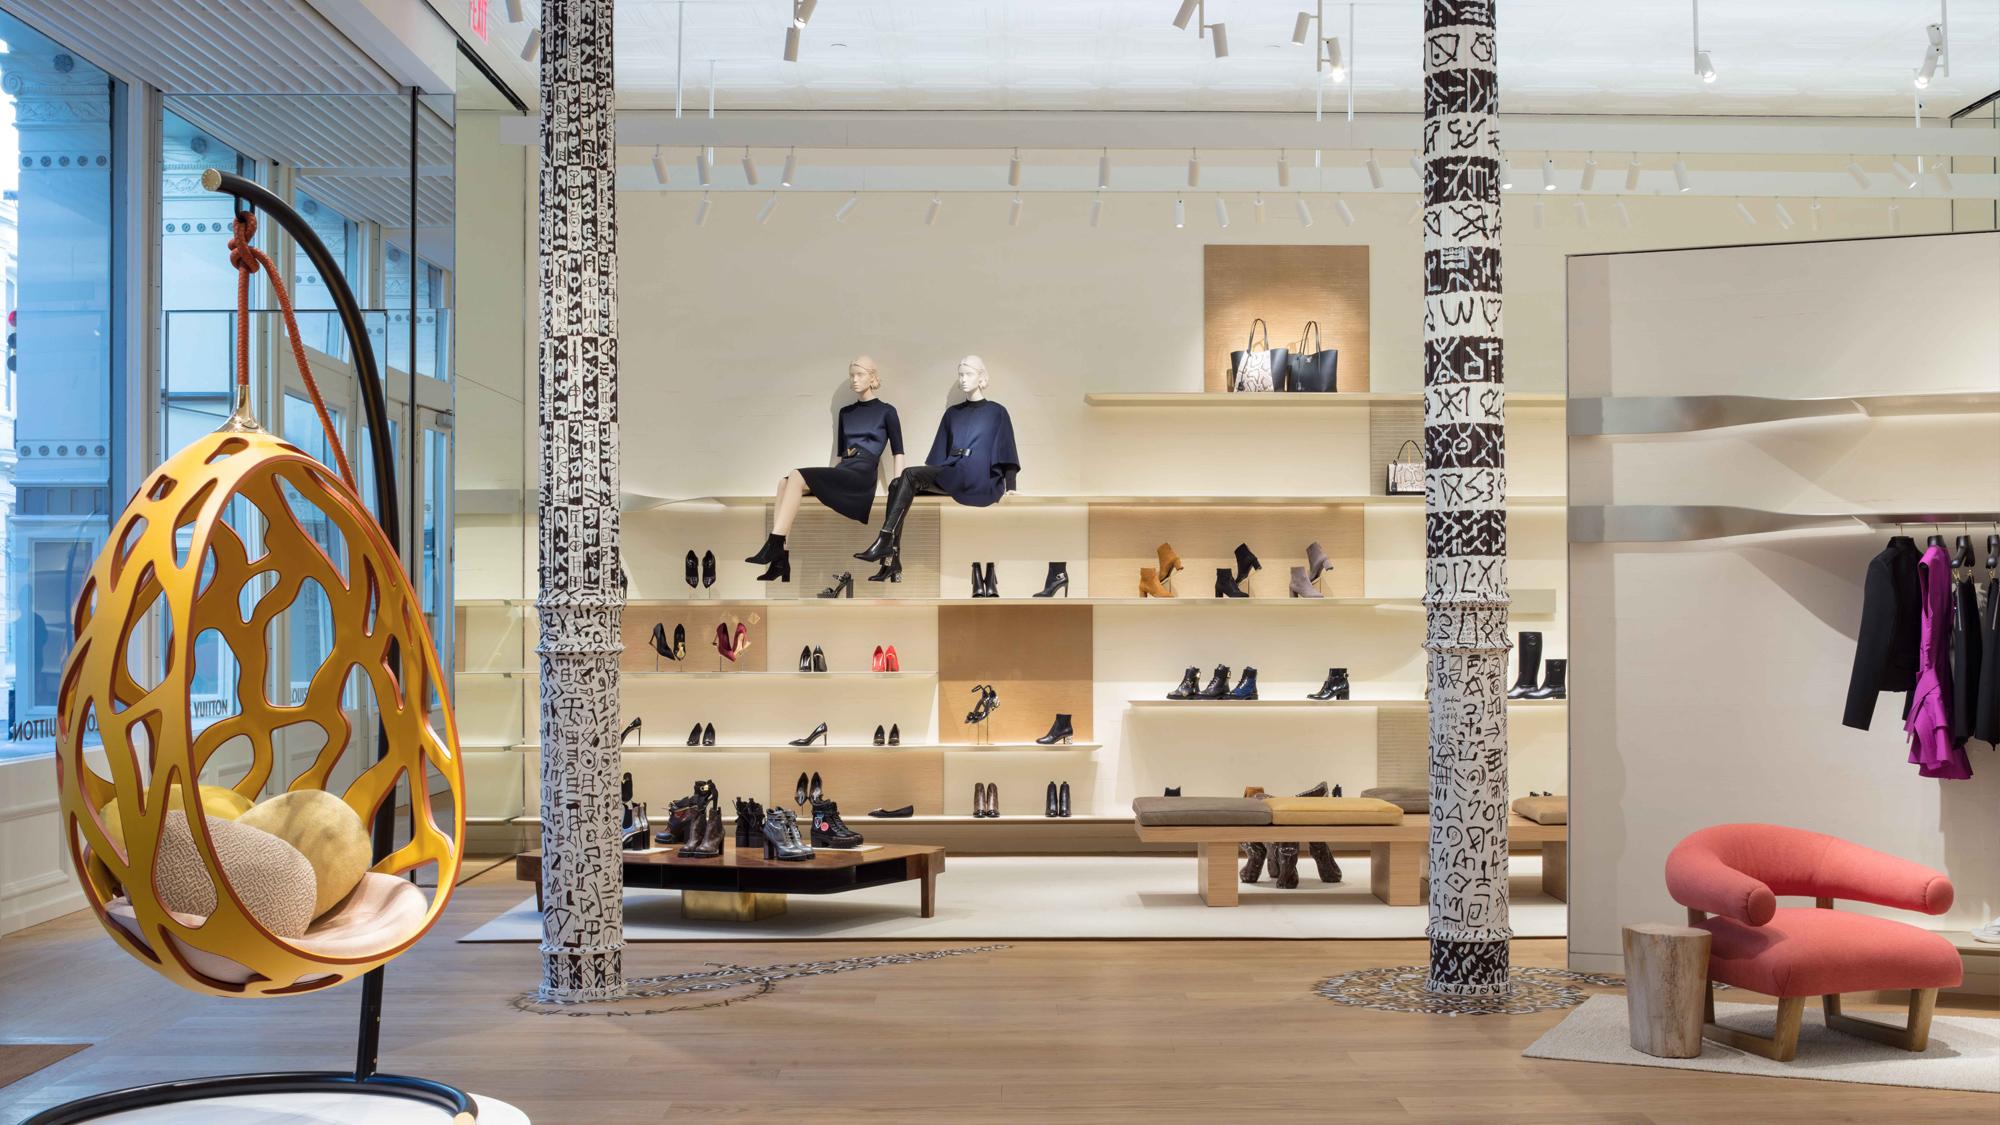 Louis Vuitton South Coast Plaza - Finished Store - Final on Vimeo